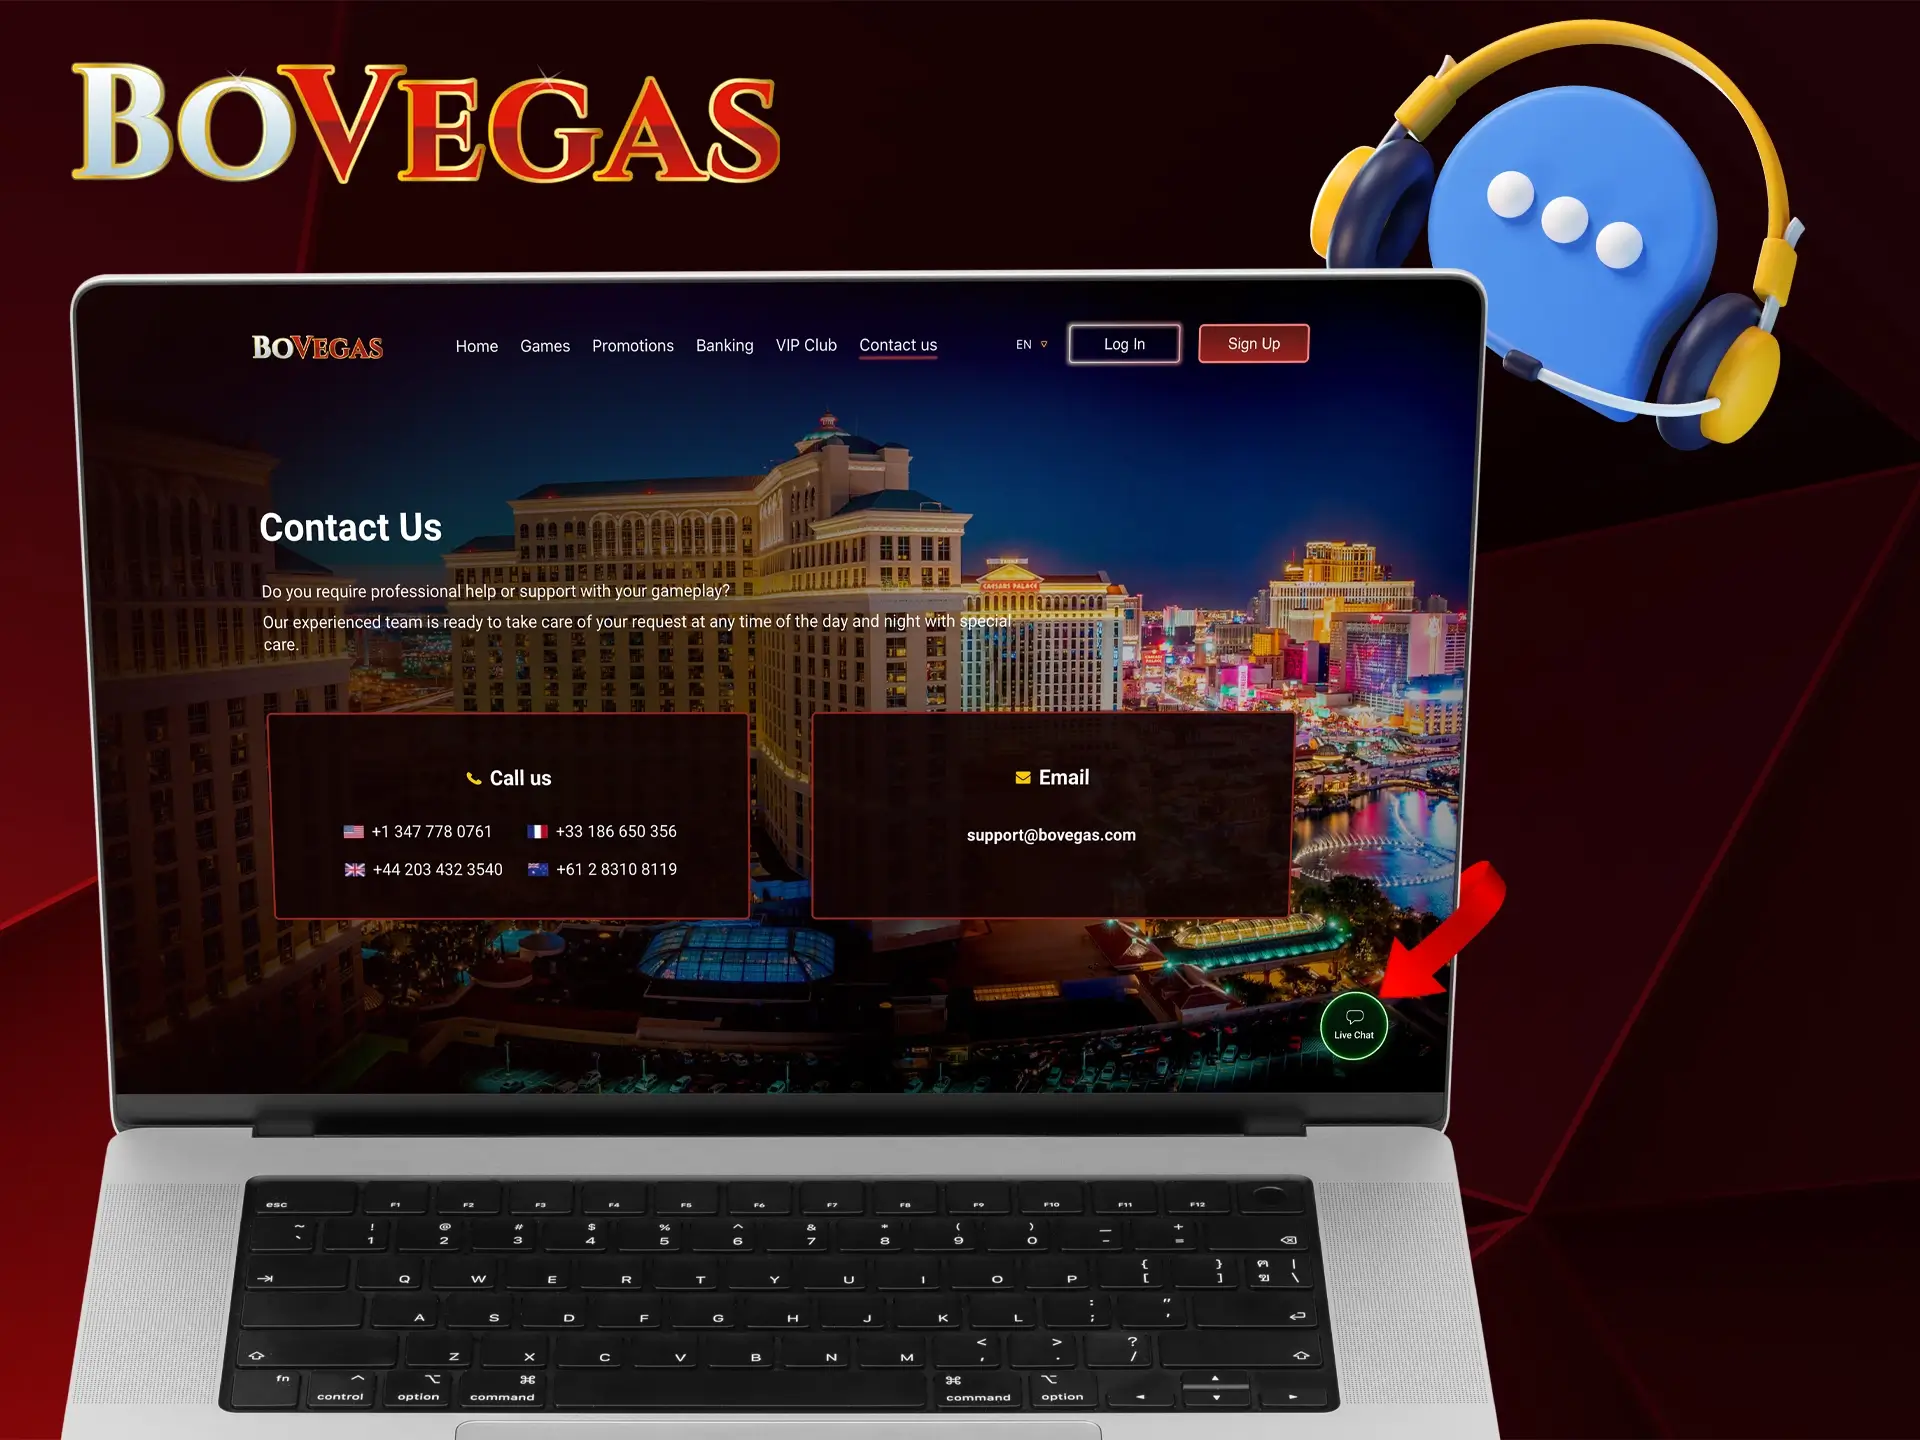 Users love the BoVegas casino service for its quick help and responsive support.